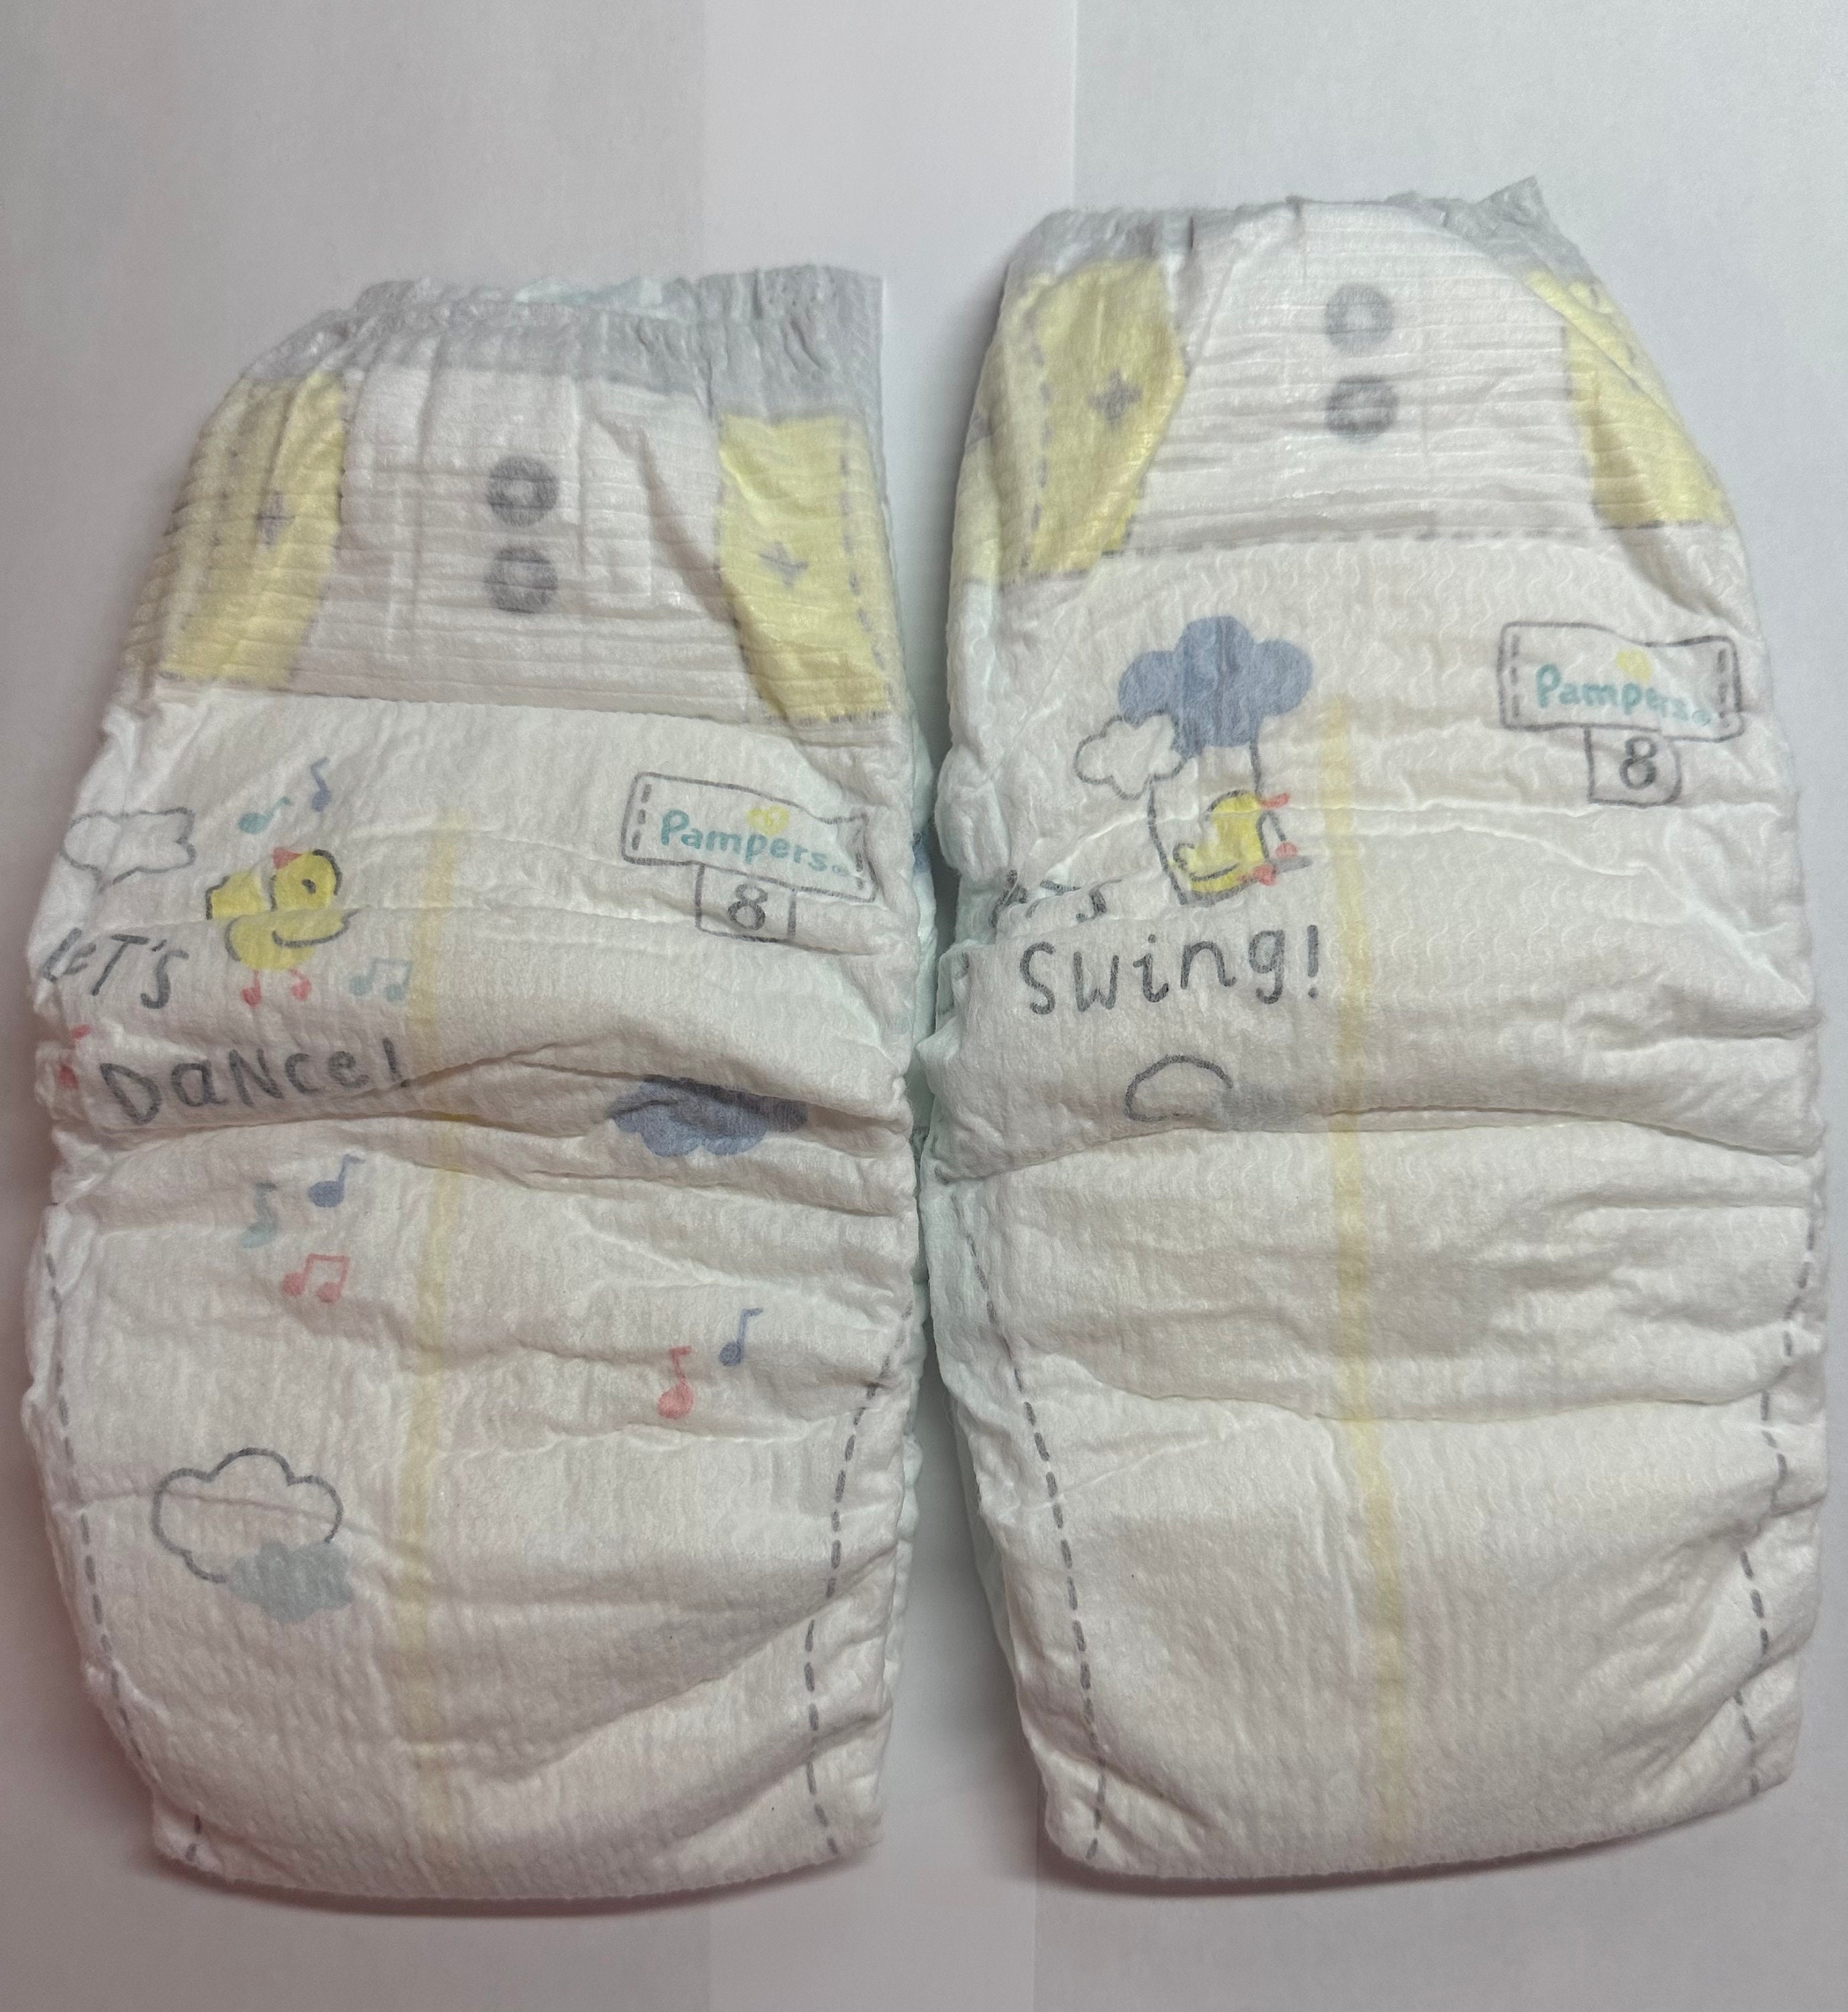 Langes Pampers, taille 8 -  France